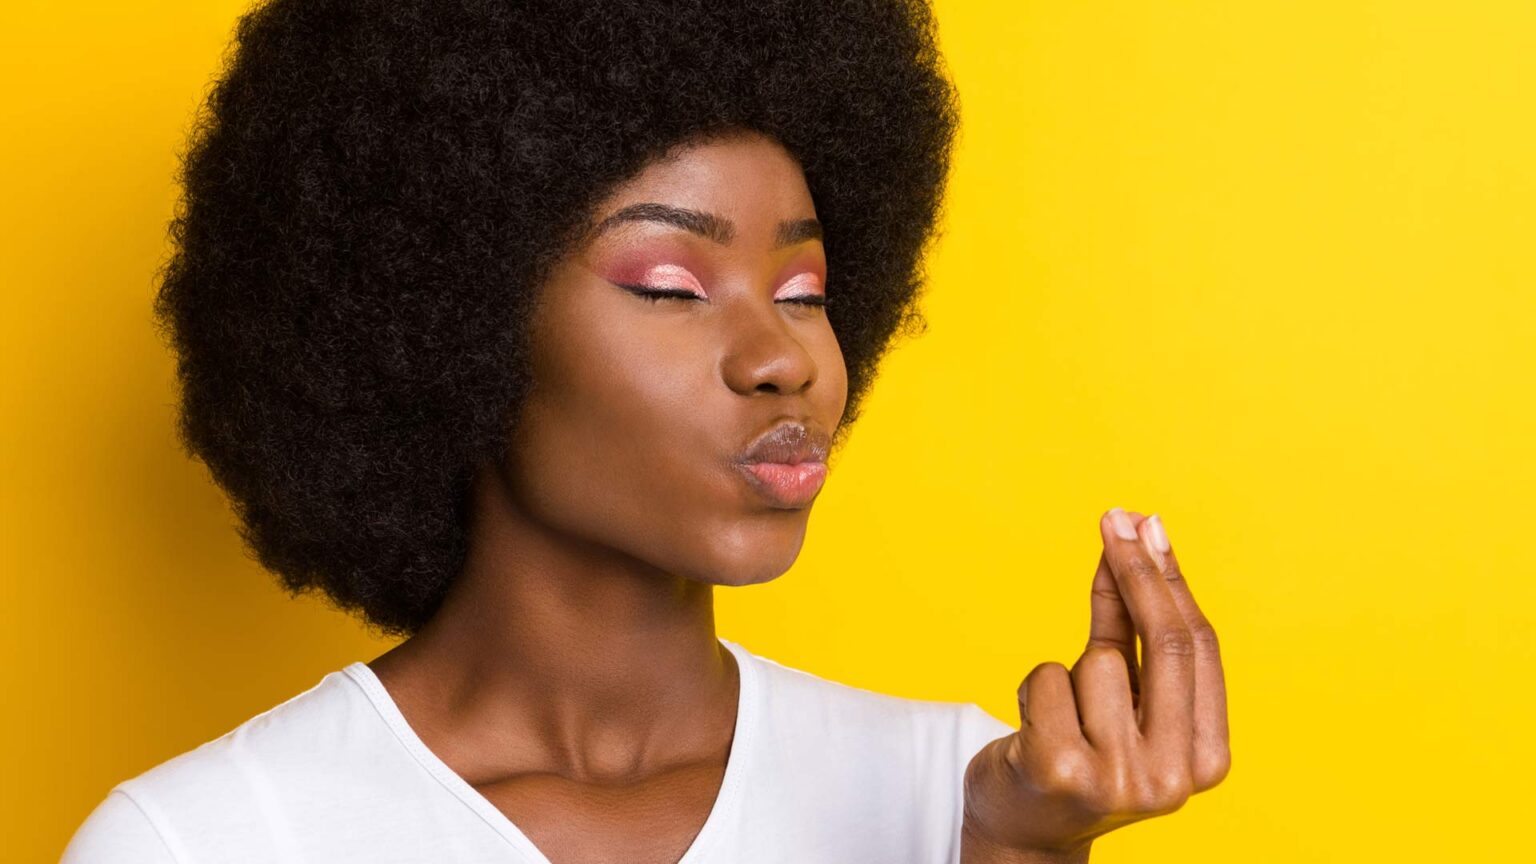 A dark-skinned woman with closed eyes and pursed lips holding her forefingers together against a yellow background.